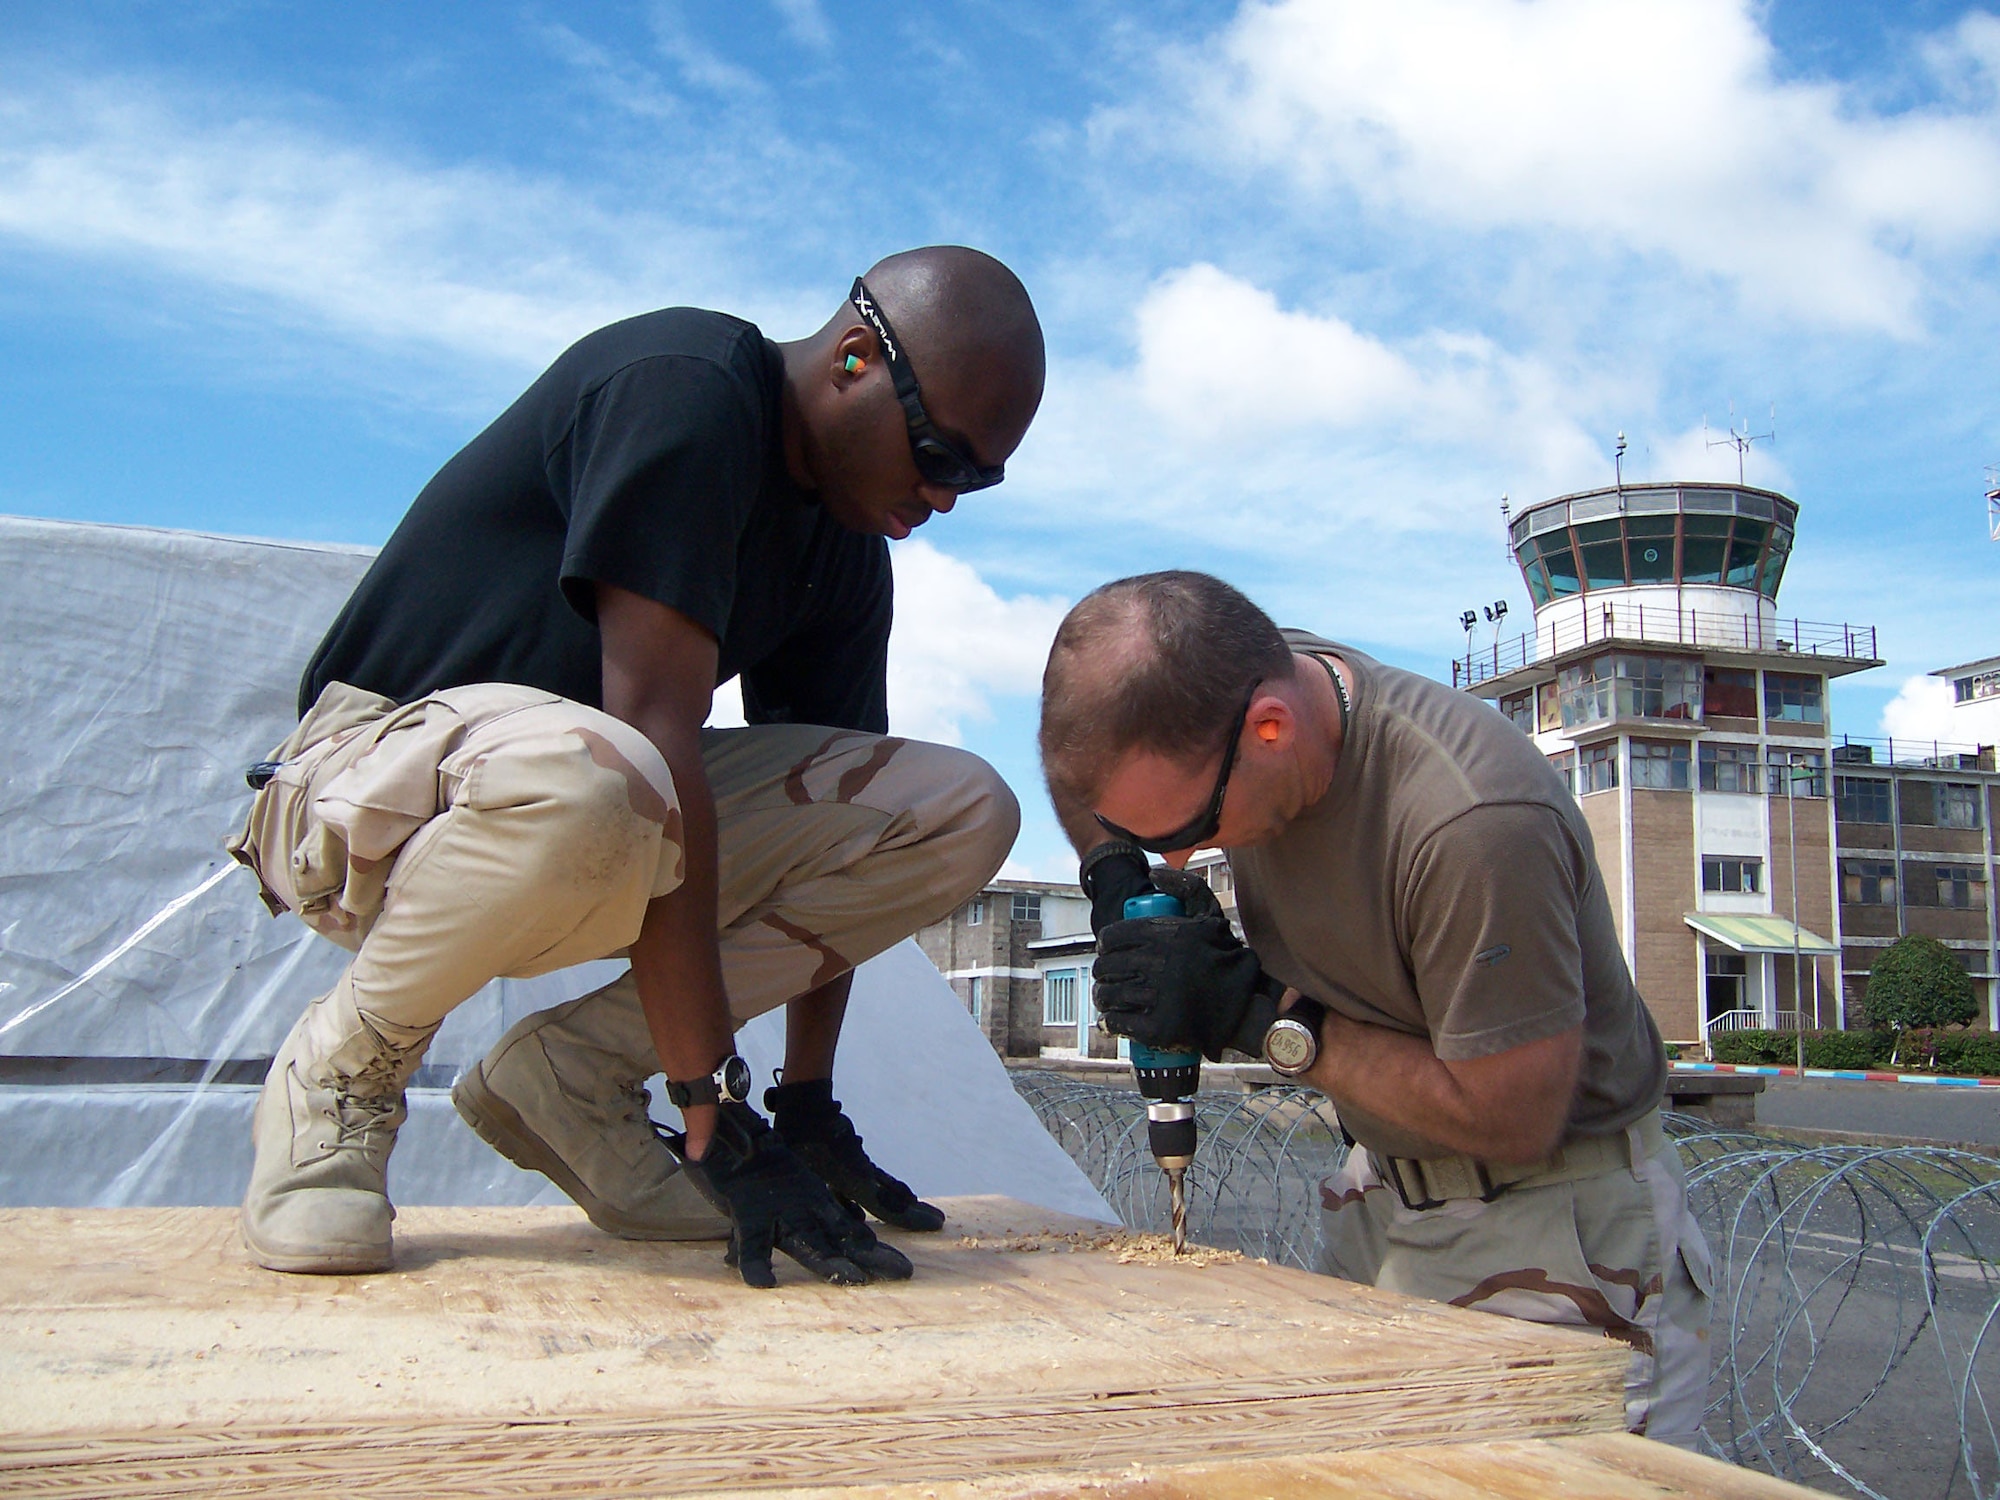 Tech. Sgt. Terreon Shirlee (left) assists Capt. James King drill holes into plywood Dec. 8 that will serve as the base for pallets being air dropped into eastern Kenya. Sergeant Shirlee is an air transportation journeyman deployed to the 386th Expeditionary Logistics Readiness Squadron from Little Rock Air Force Base, Ark., and Captain King is the commander of the movement control team at the 386th ELRS deployed from Robins AFB, Ga. (U.S. Air Force photo/Tech. Sgt. Steve Staedler)